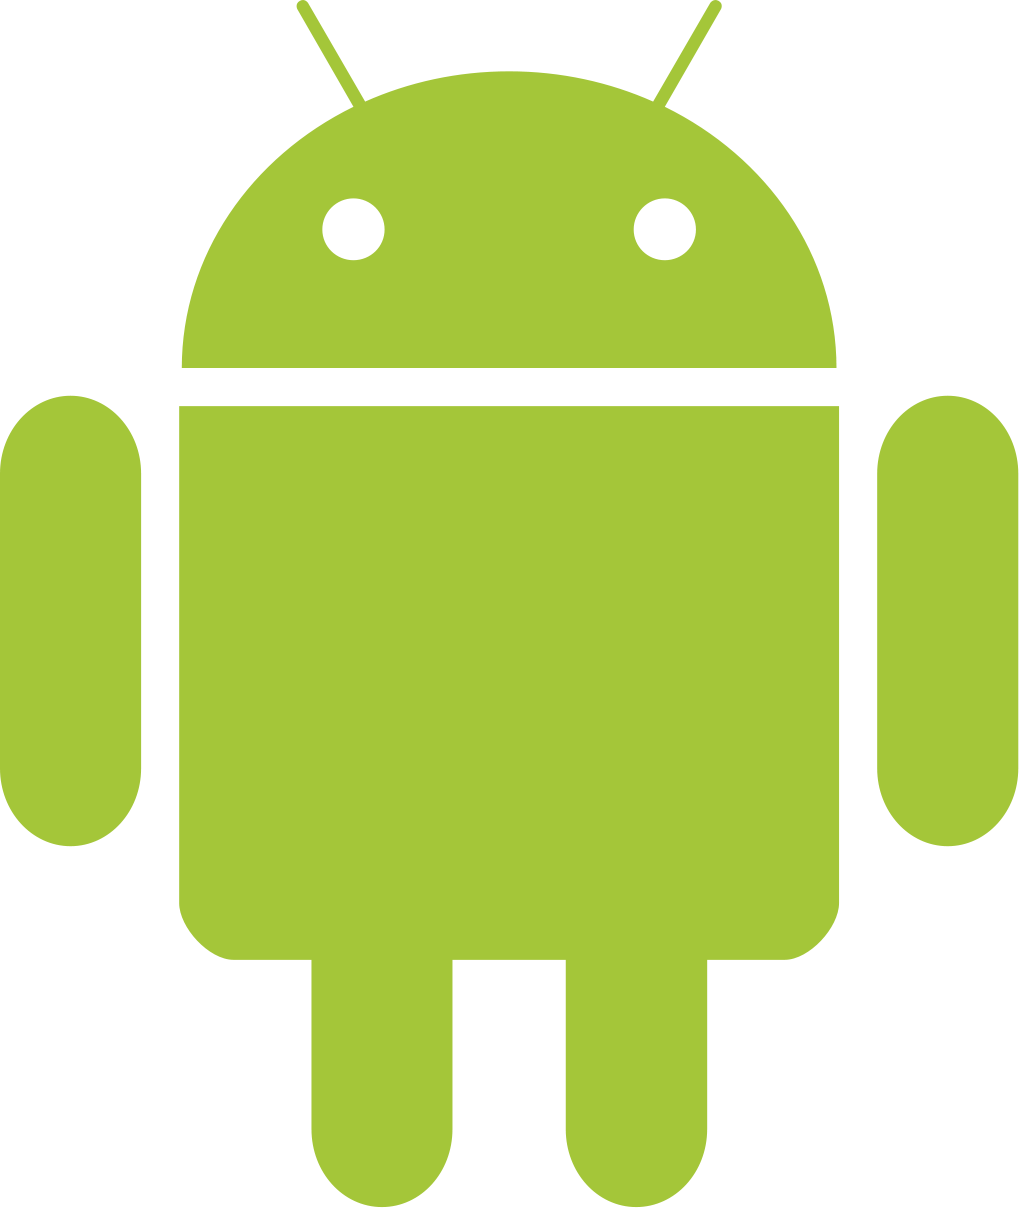 Android Logo Png - Android, Transparent background PNG HD thumbnail